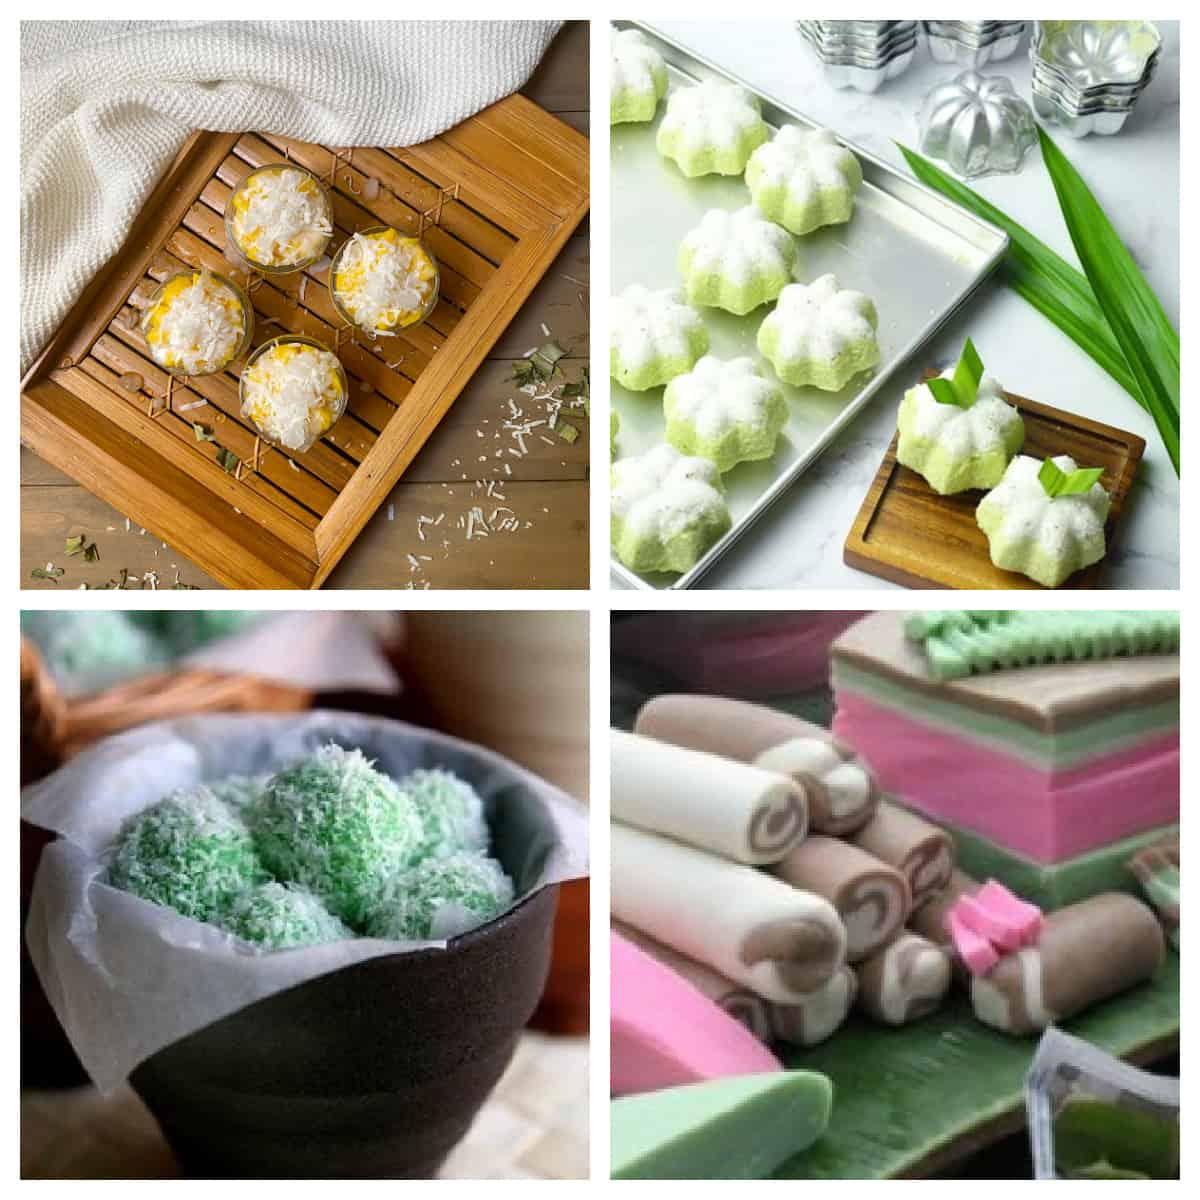 Indonesian desserts in a collage.